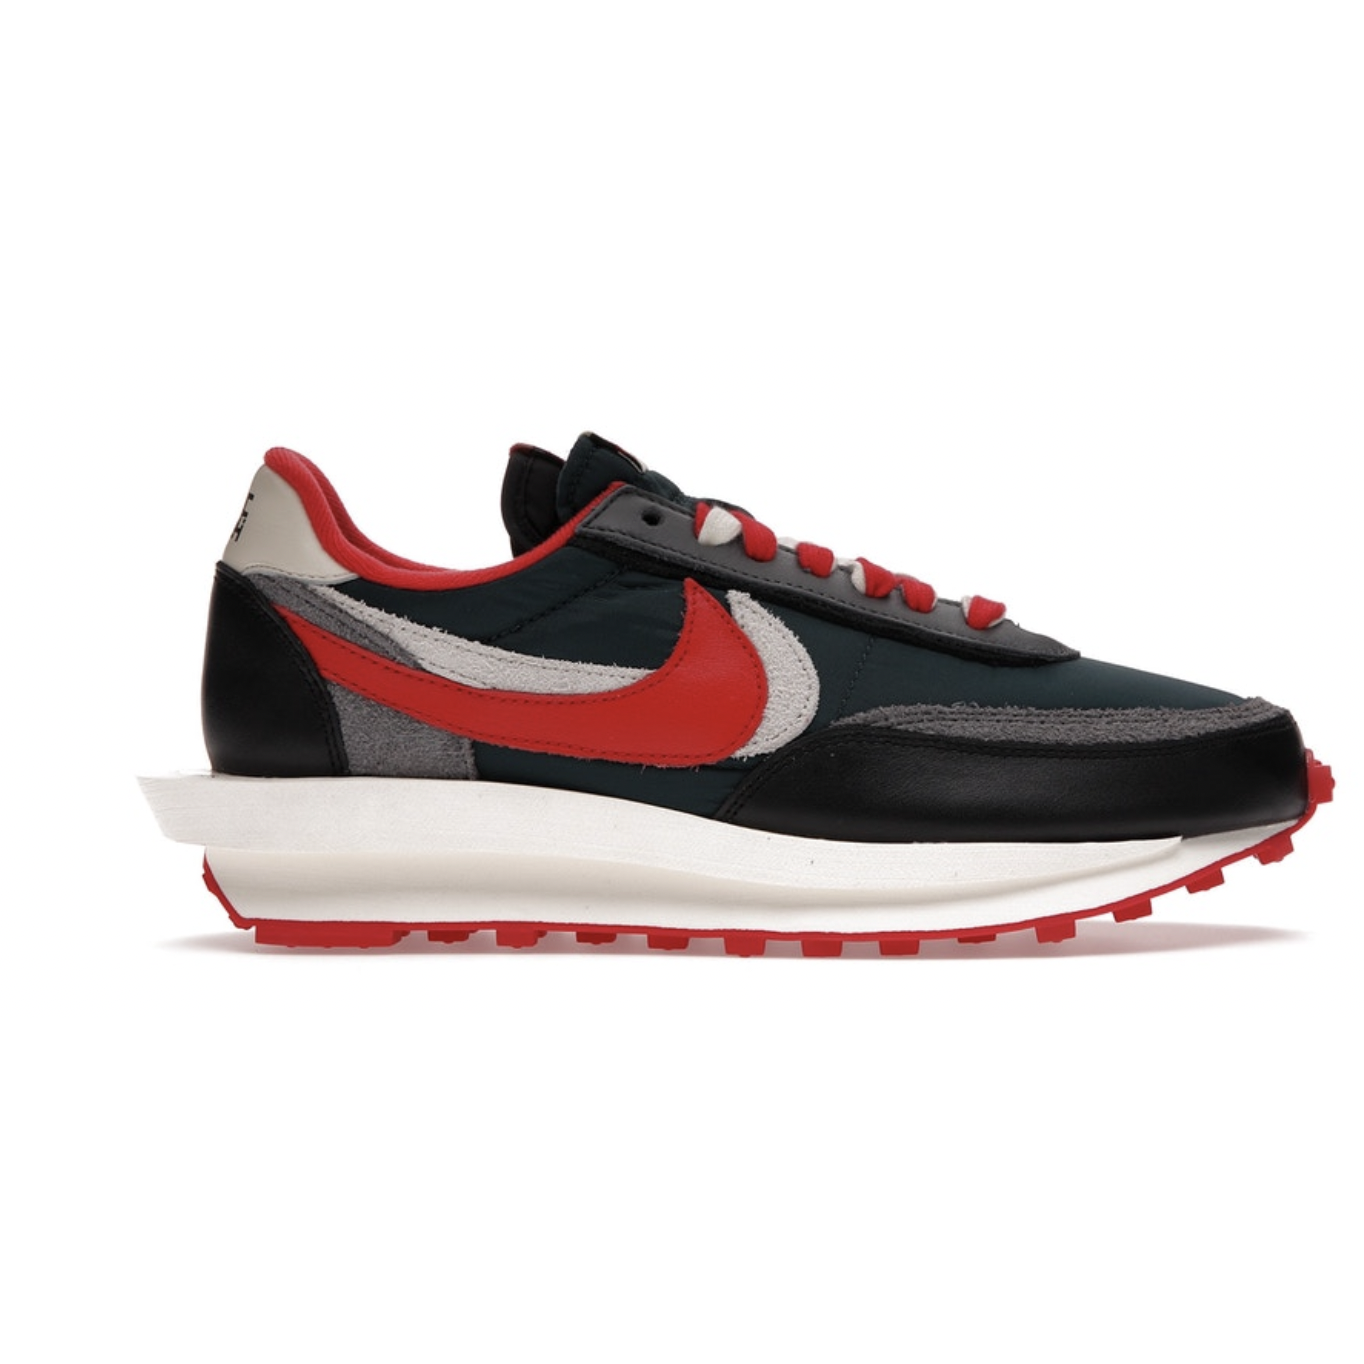 Nike LD Waffle sacai Undercover Midnight Spruce University Red from Nike